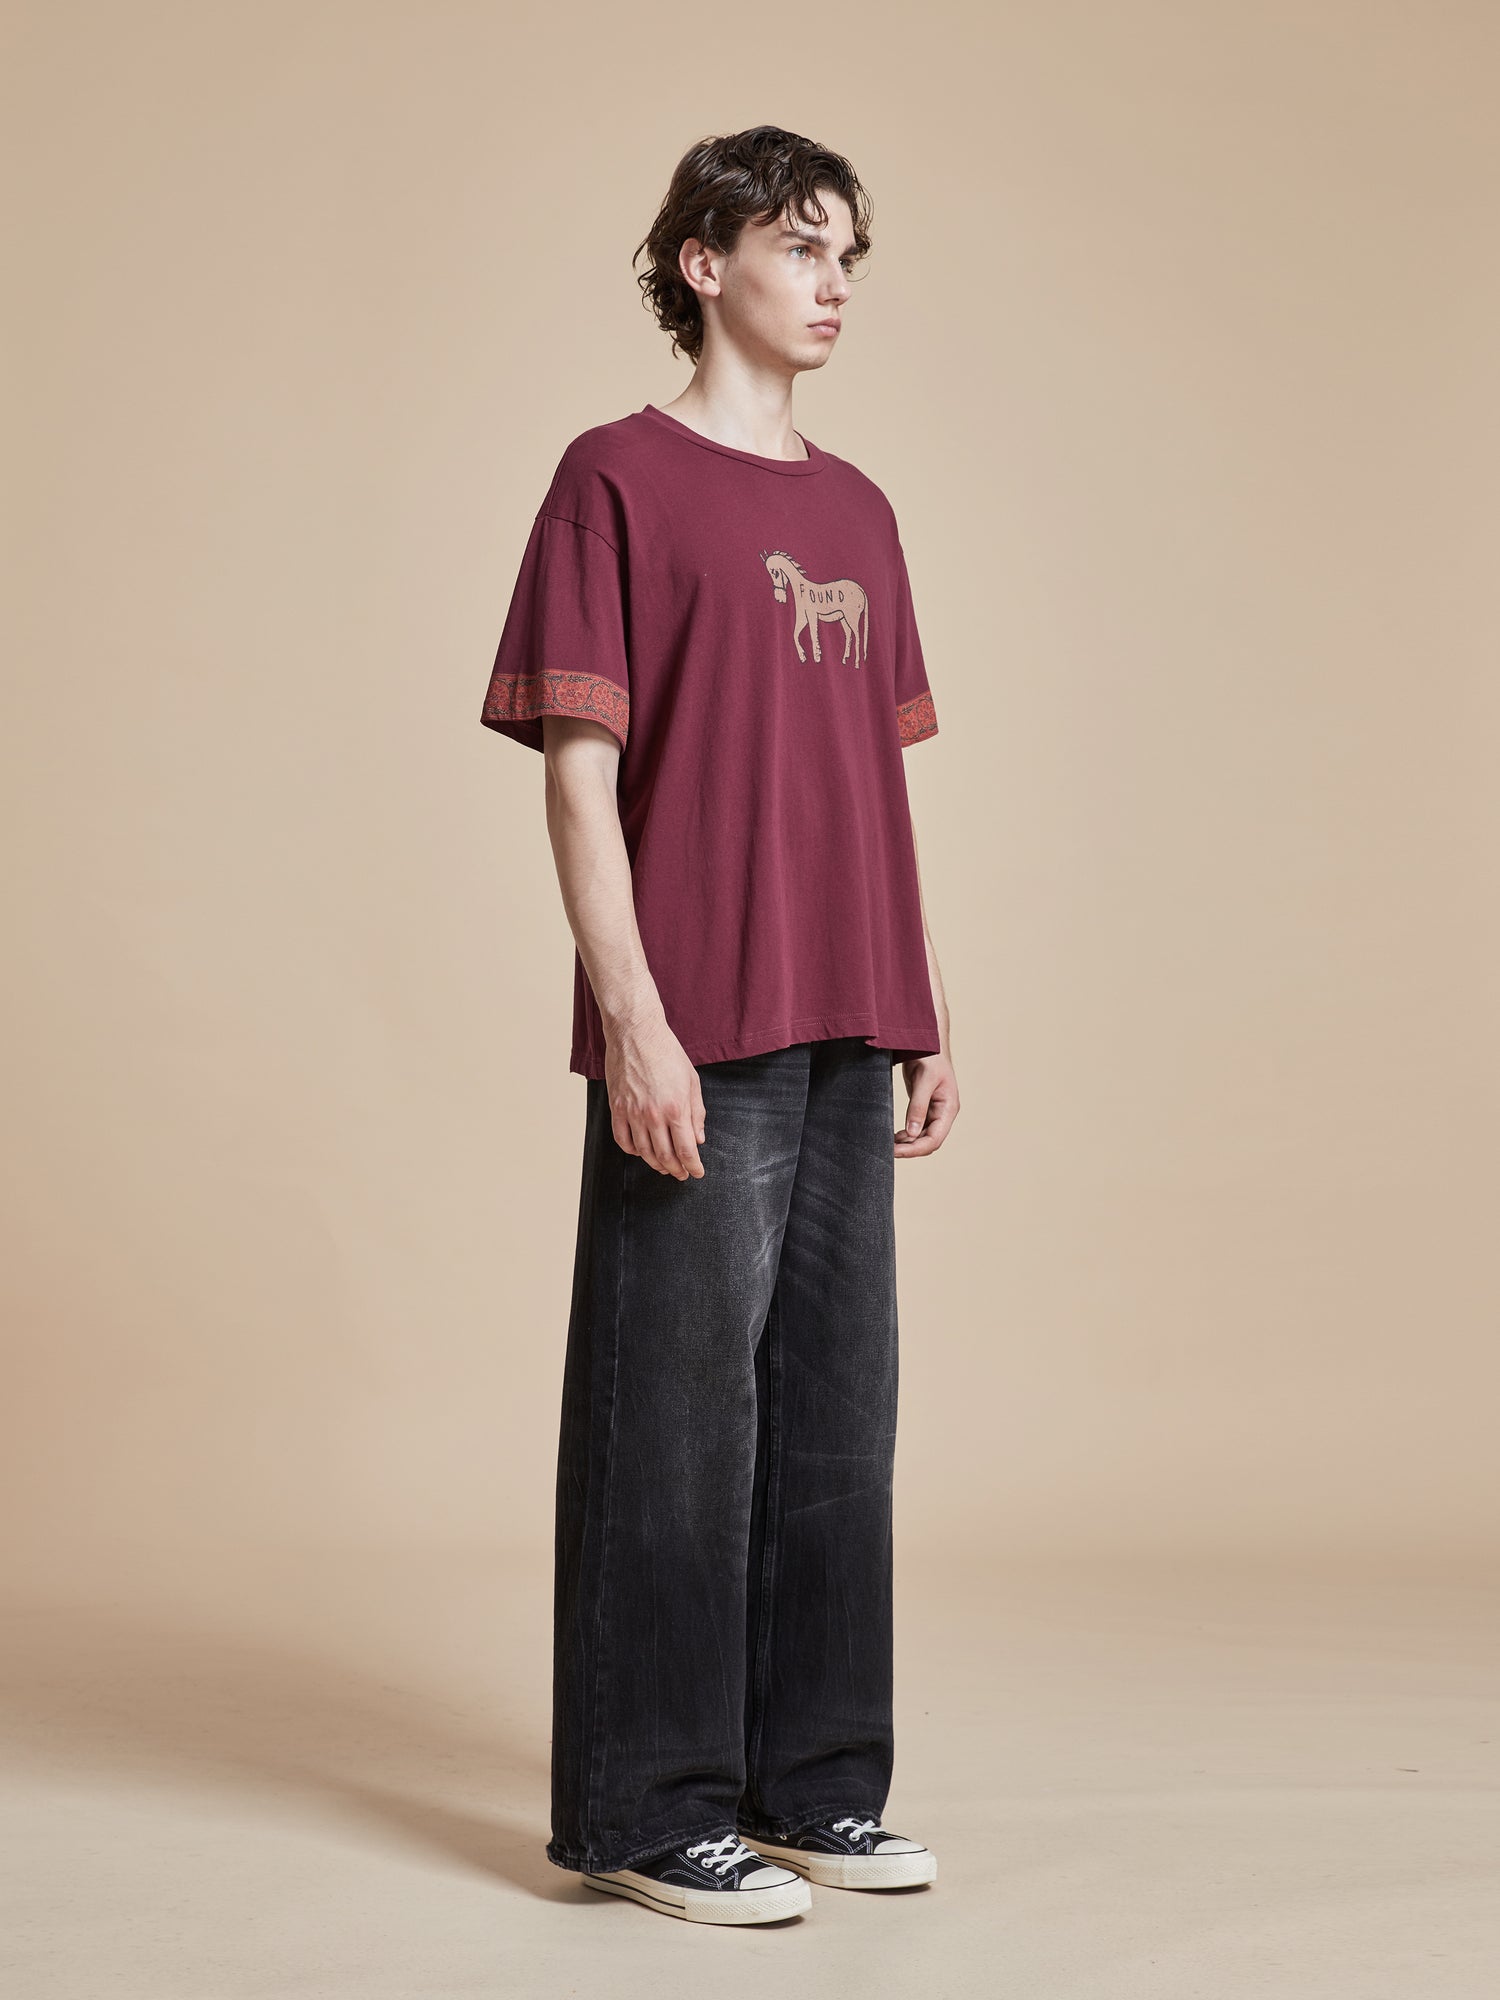 A man wearing a Found Horse Embellishment Tee burgundy t-shirt and black pants.